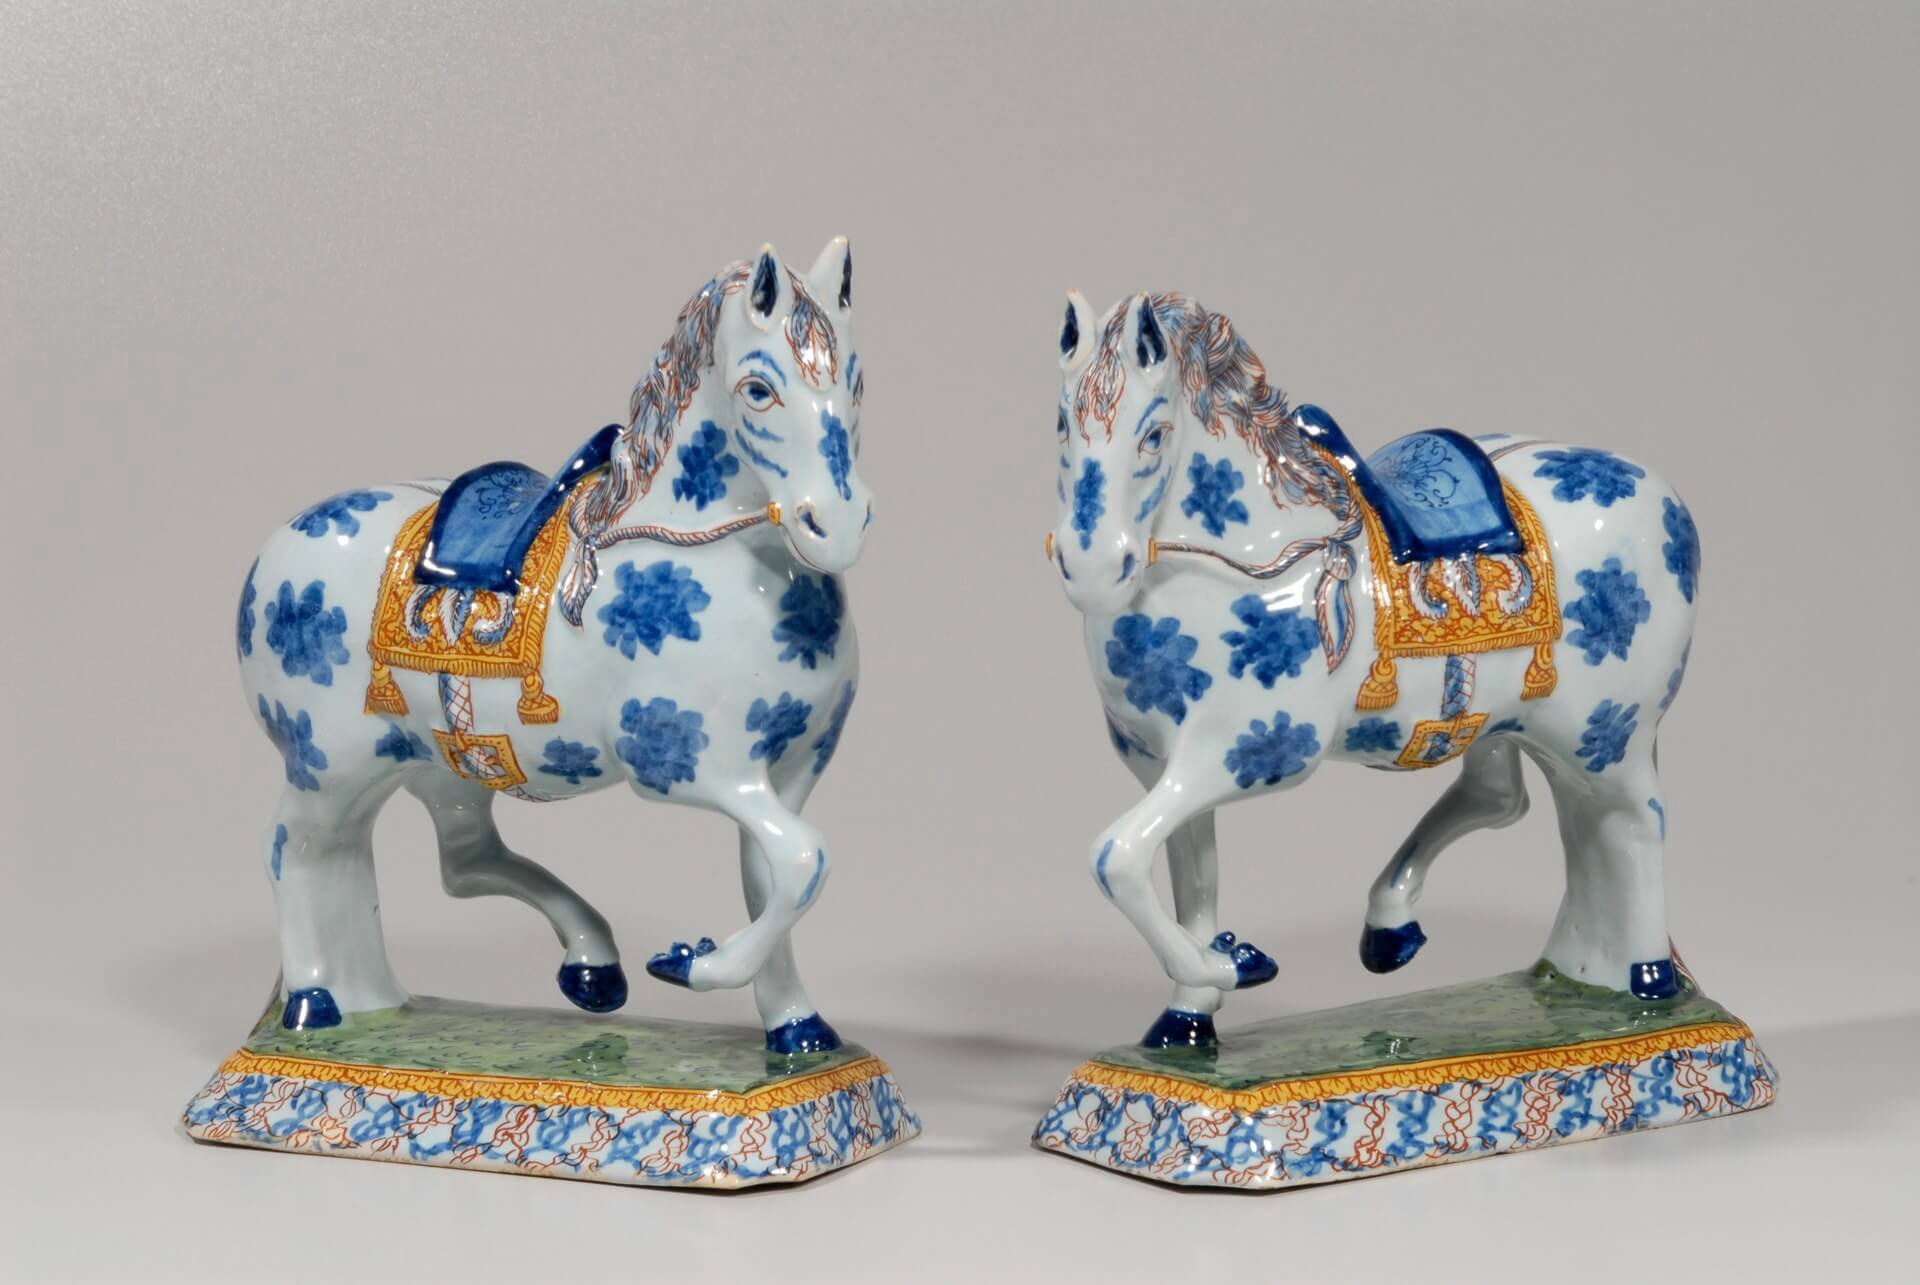 Antique Delft Pottery of a pair of horses